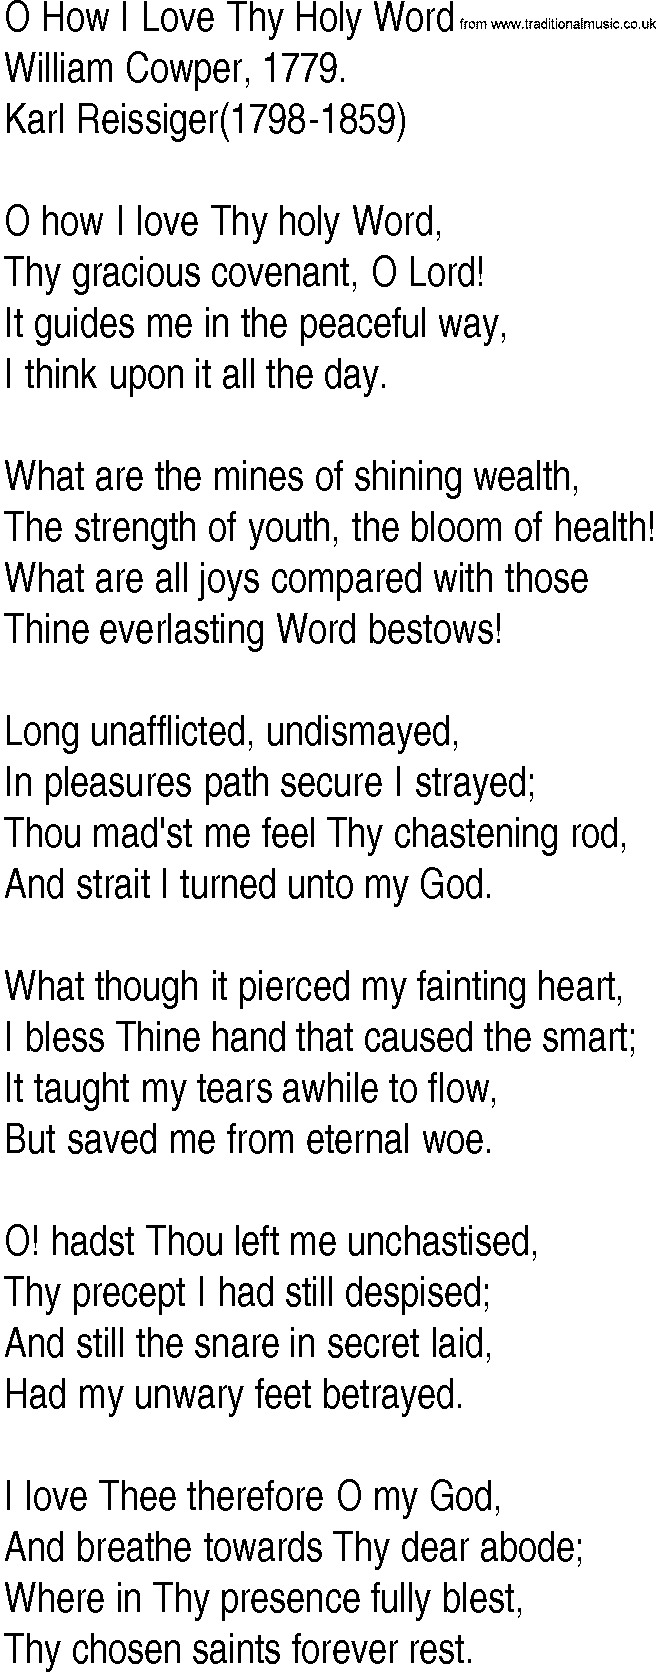 Hymn and Gospel Song: O How I Love Thy Holy Word by William Cowper lyrics